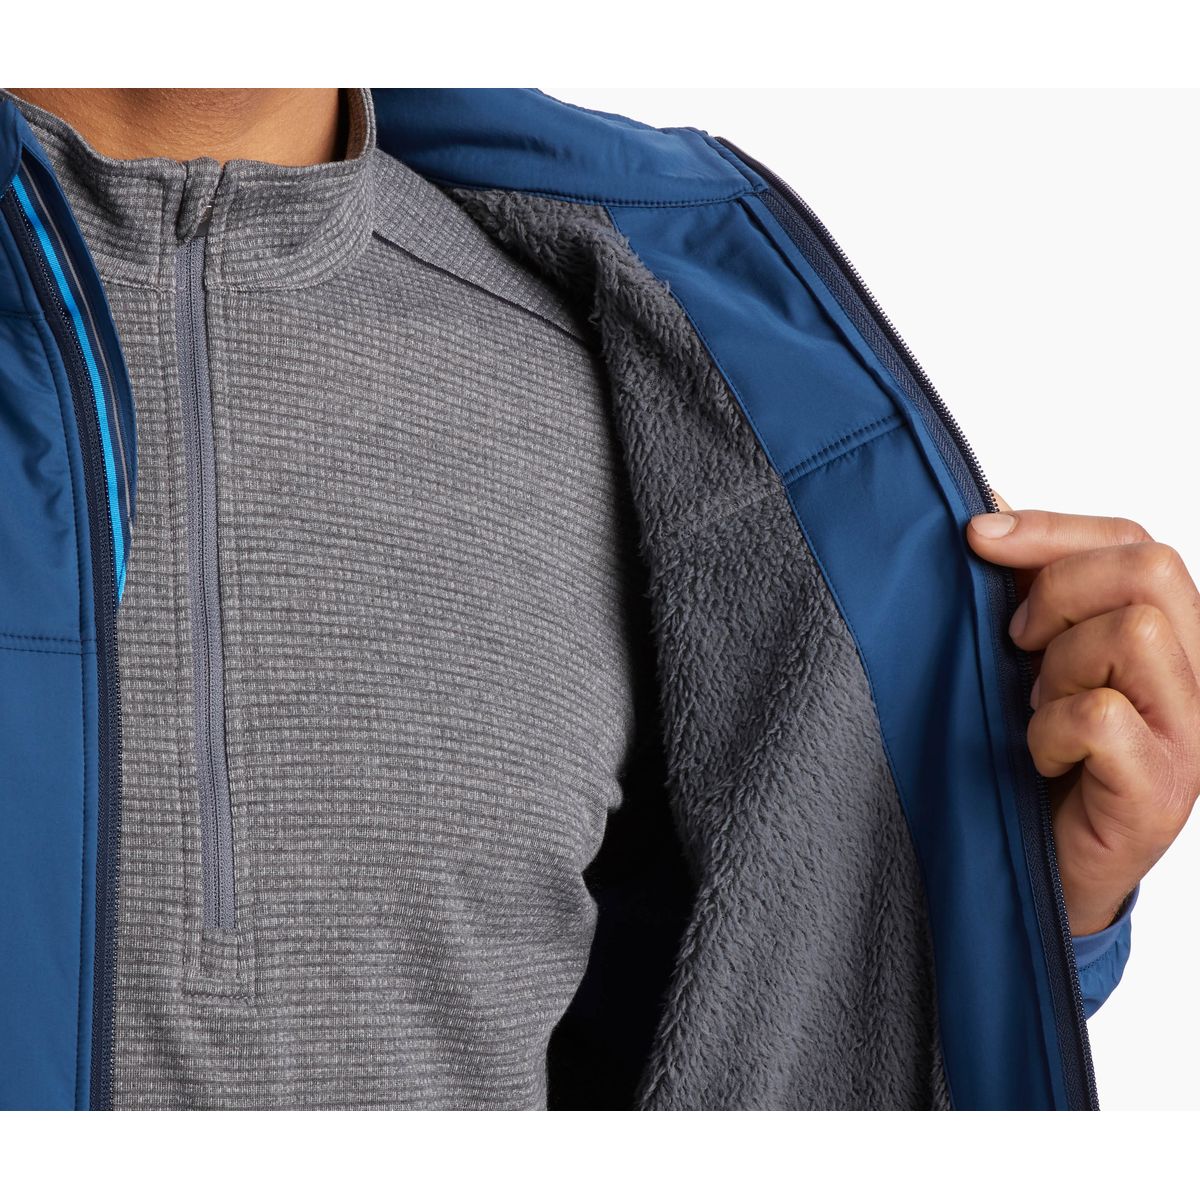 KUHL The One Jacket - Men's  Synthetic-Filled Jackets